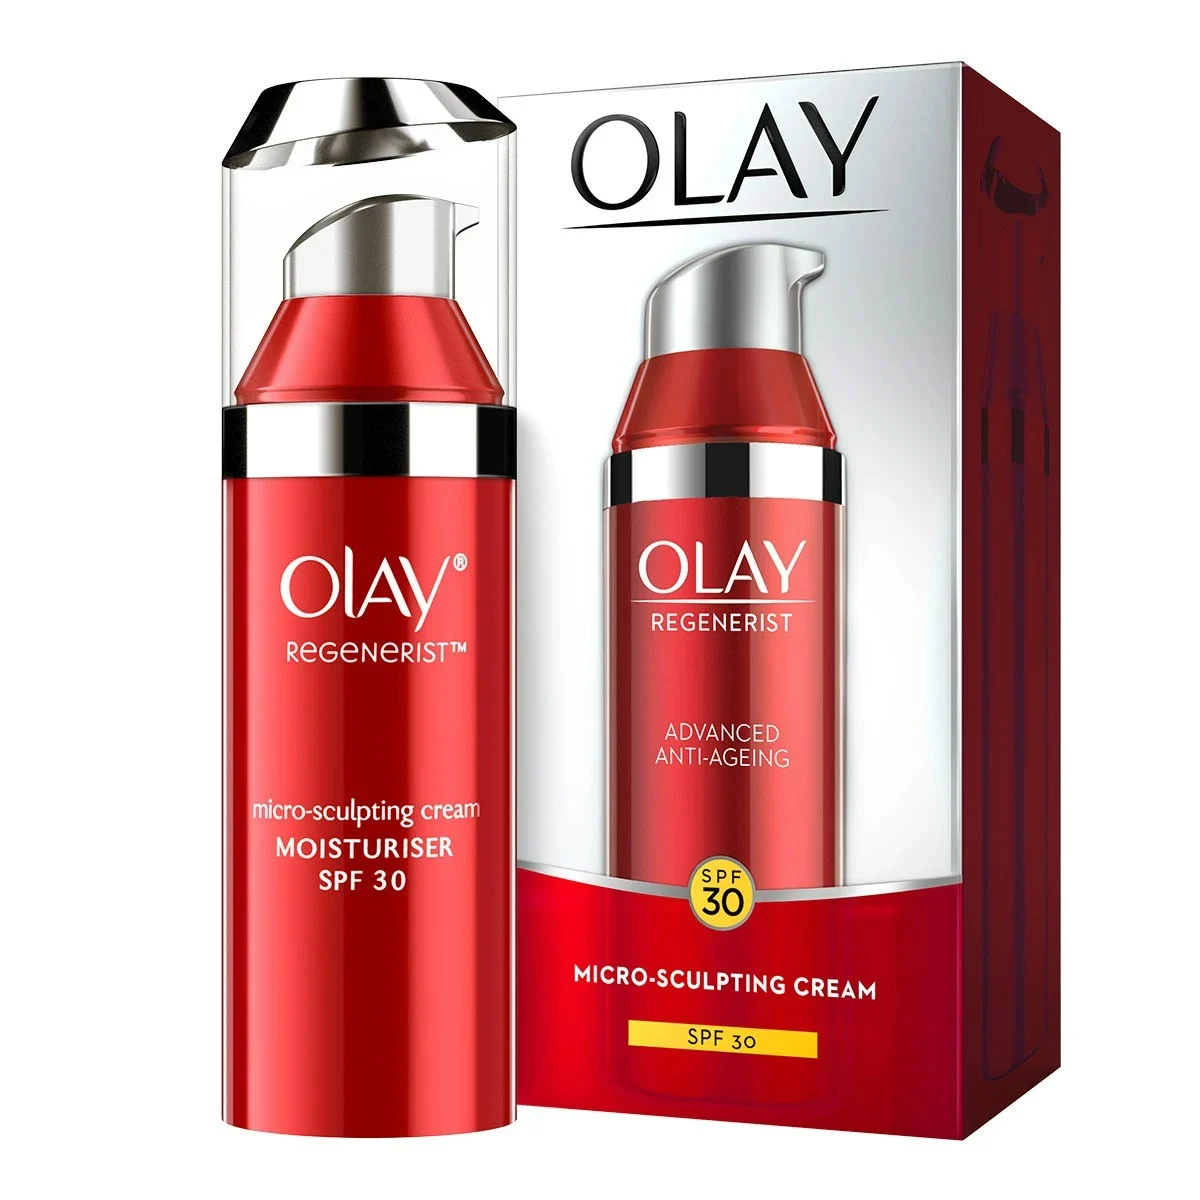 olay-india-official-website